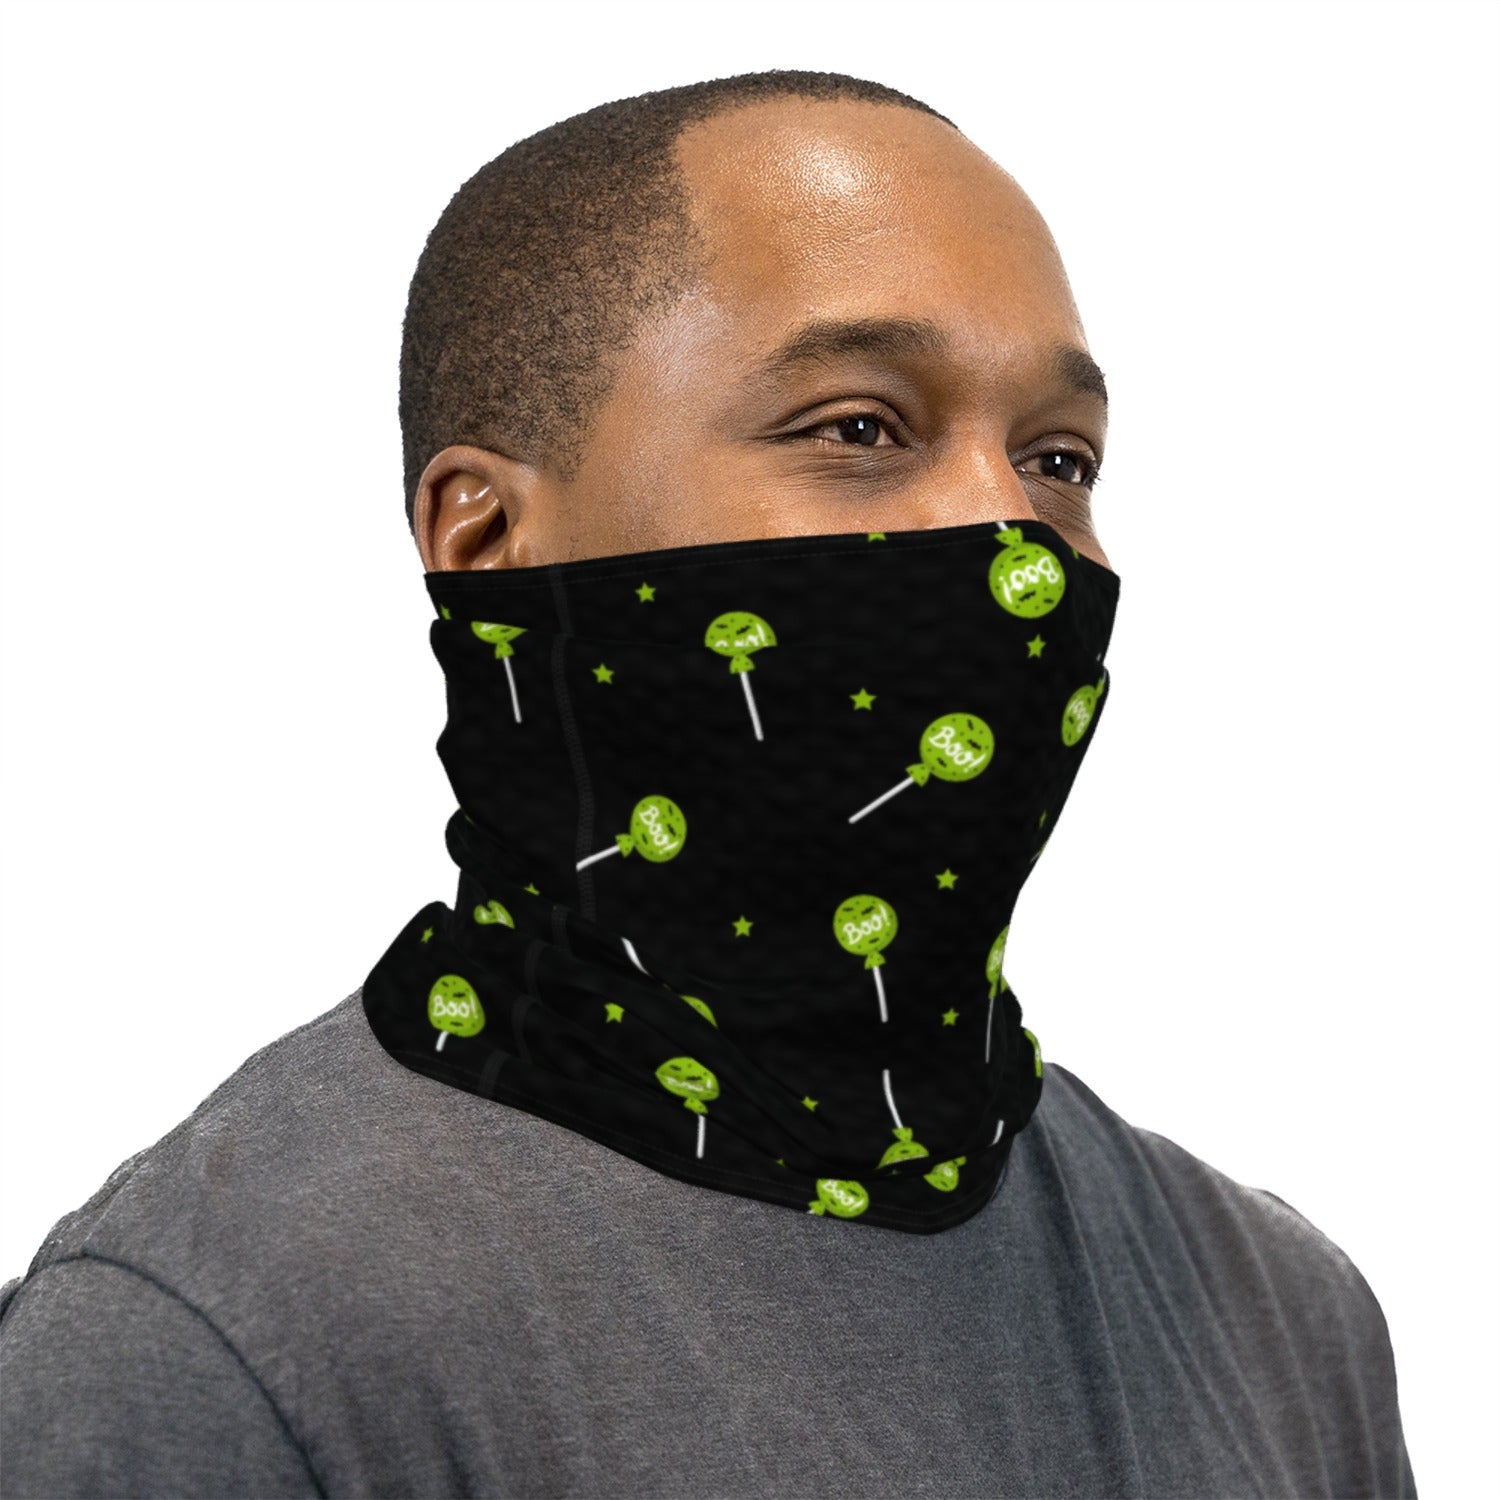 Trick or Treat Candy Neck Gaiter Face Mask